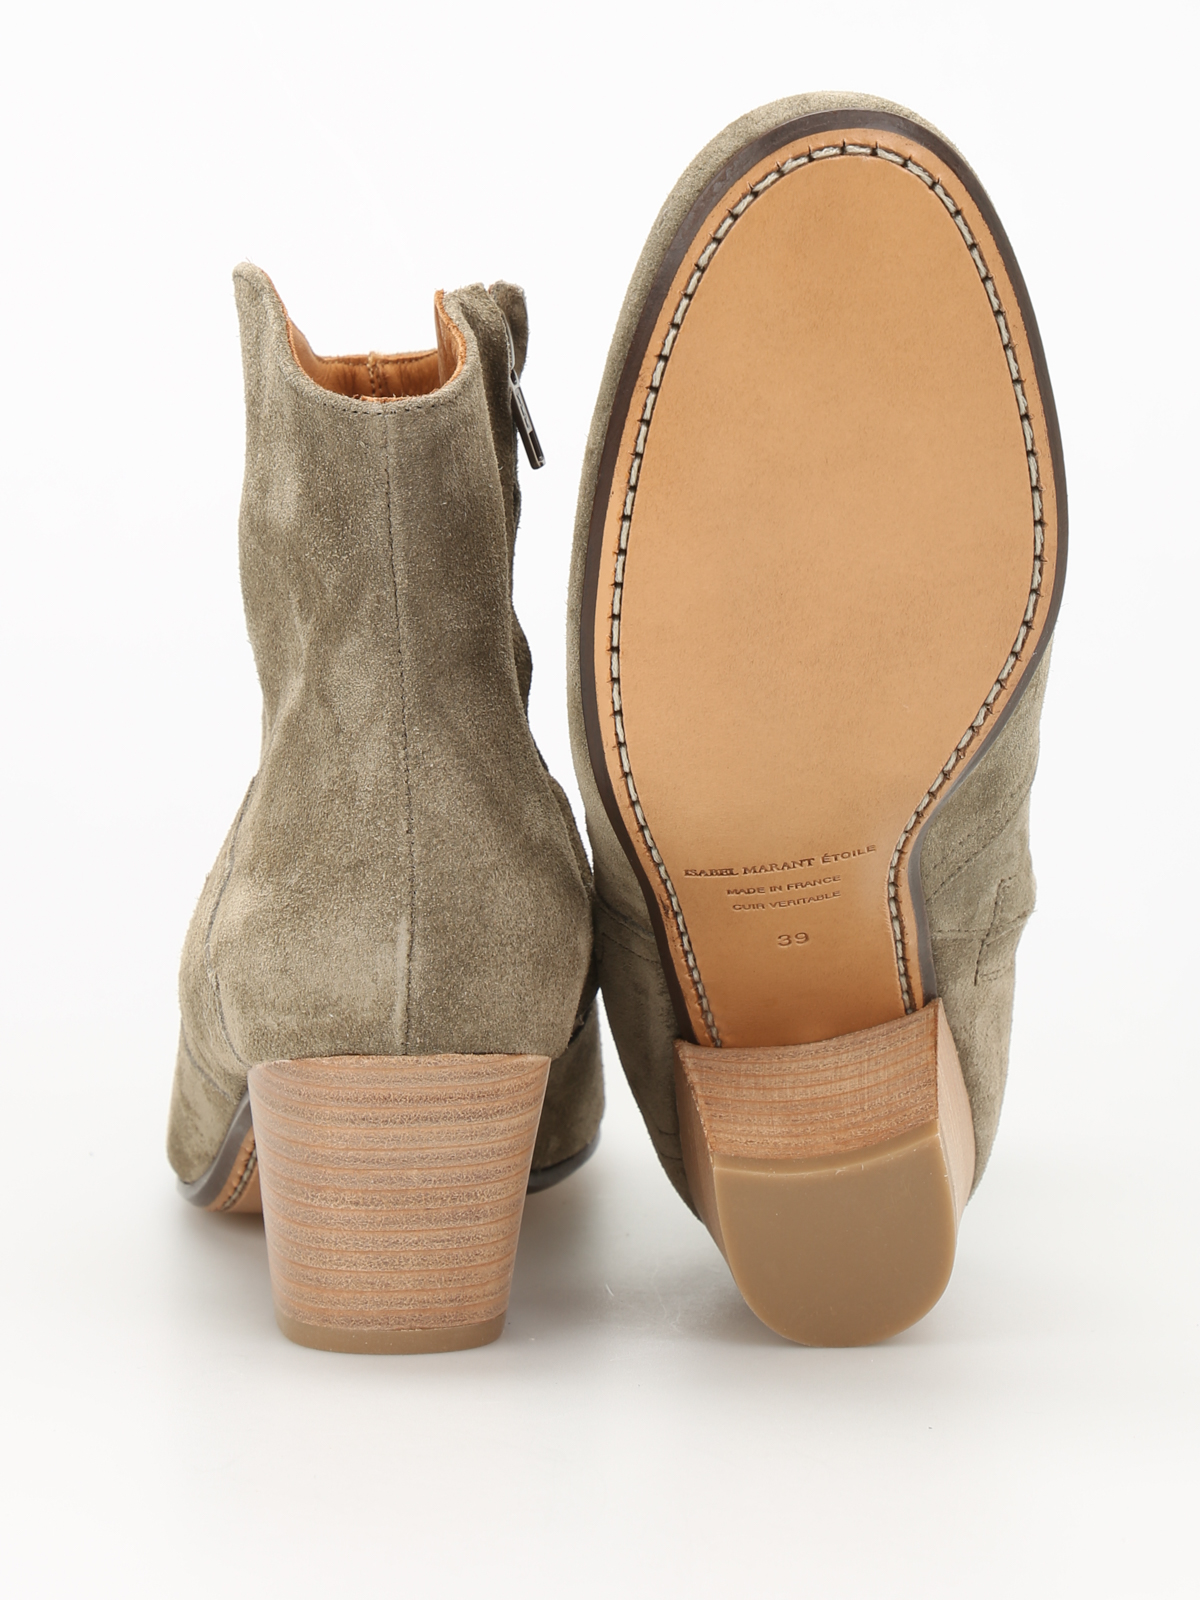 Ankle boots isabel marant etoile - suede cowgirl booties - BO010200M103S50TA